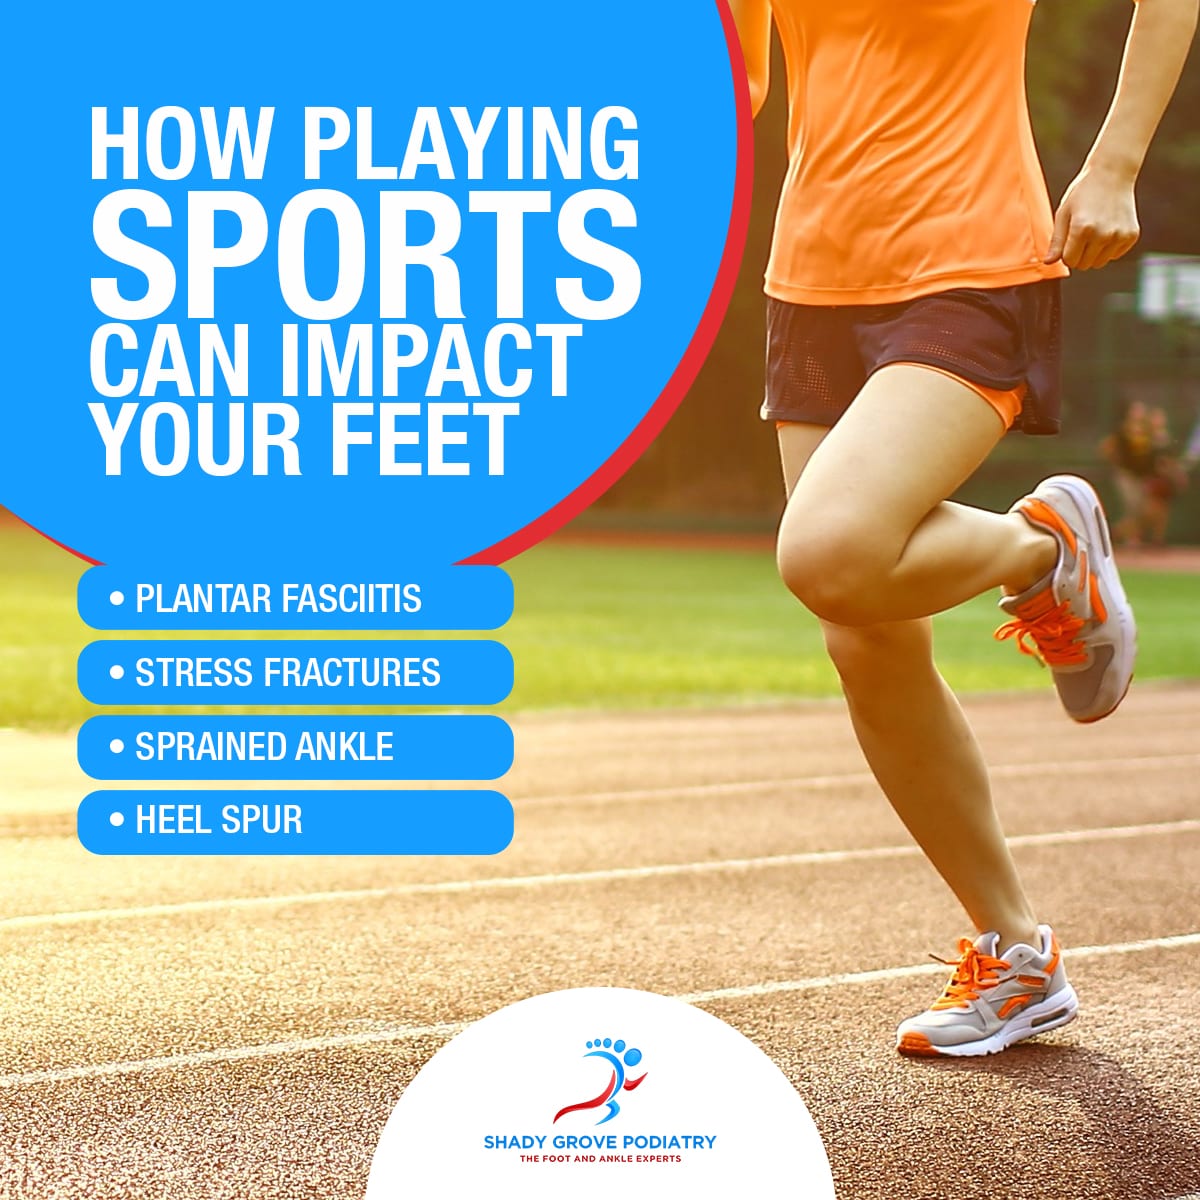 How Playing Sports Can Impact Your Feet Infographic